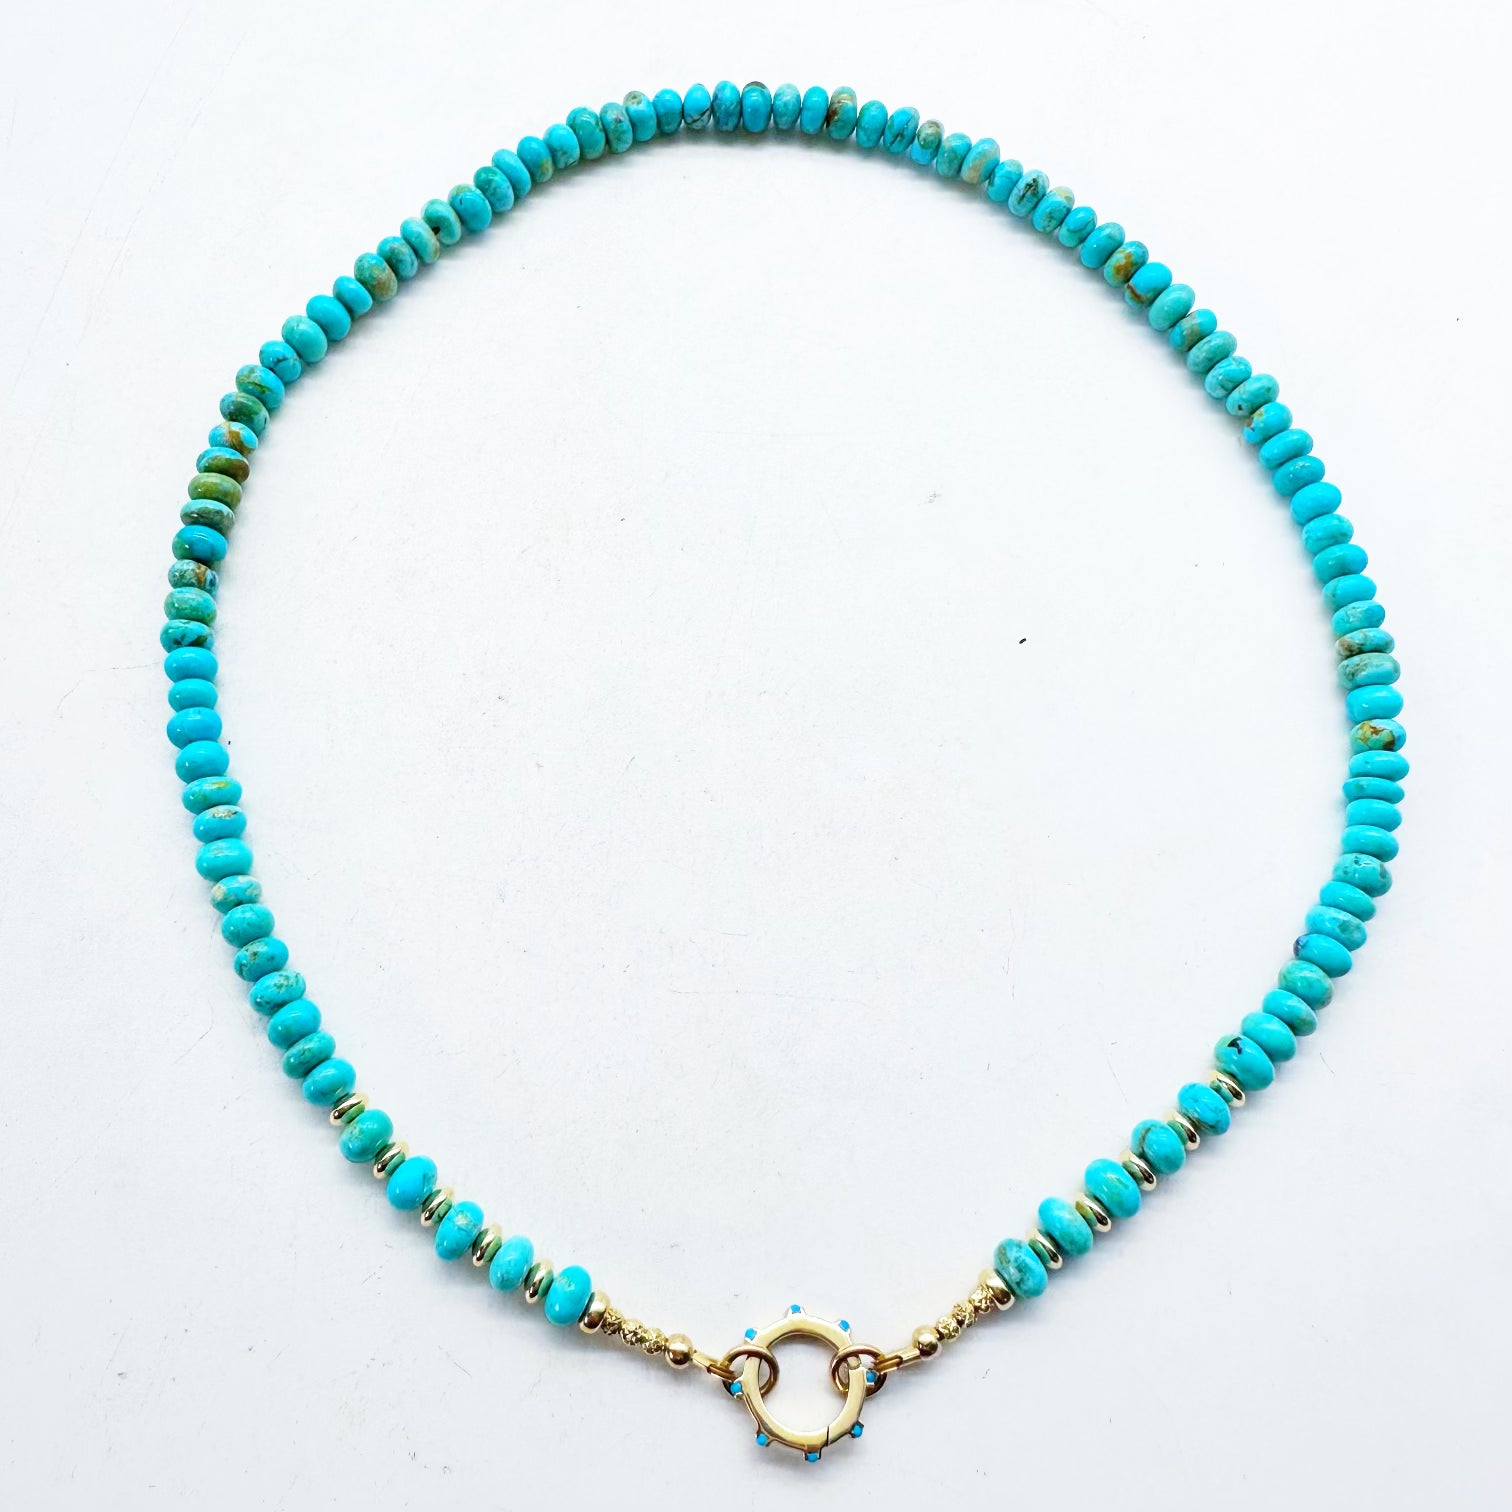 TURQUOISE NECKLACES WITH 14K GOLD